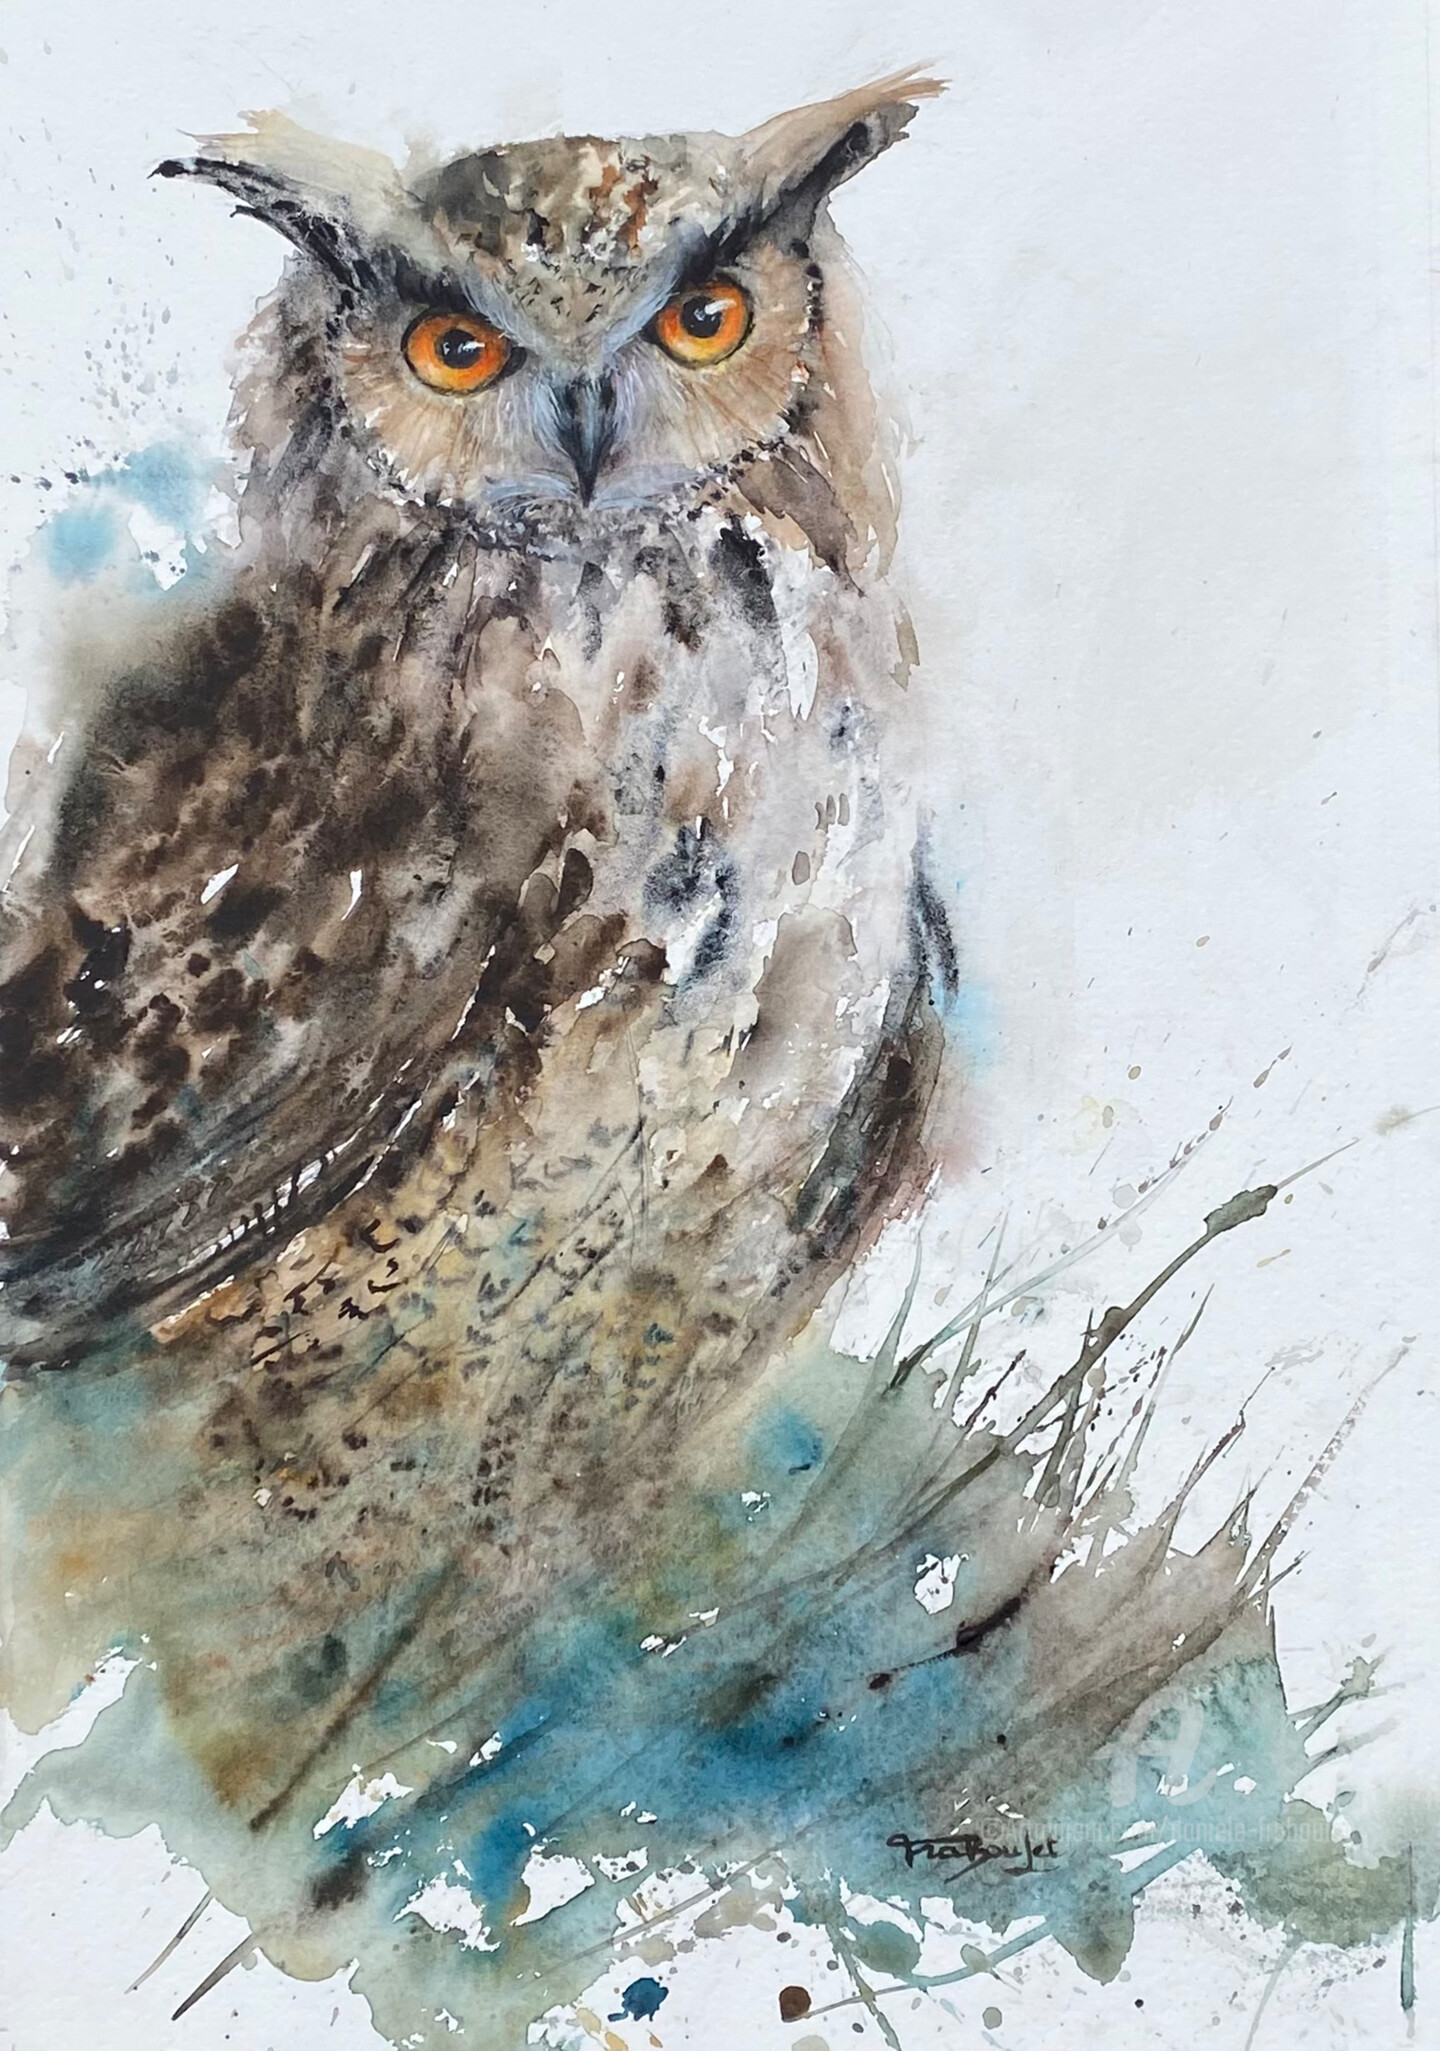 Danièle Fraboulet - The Great horned Owl - Le Grand duc